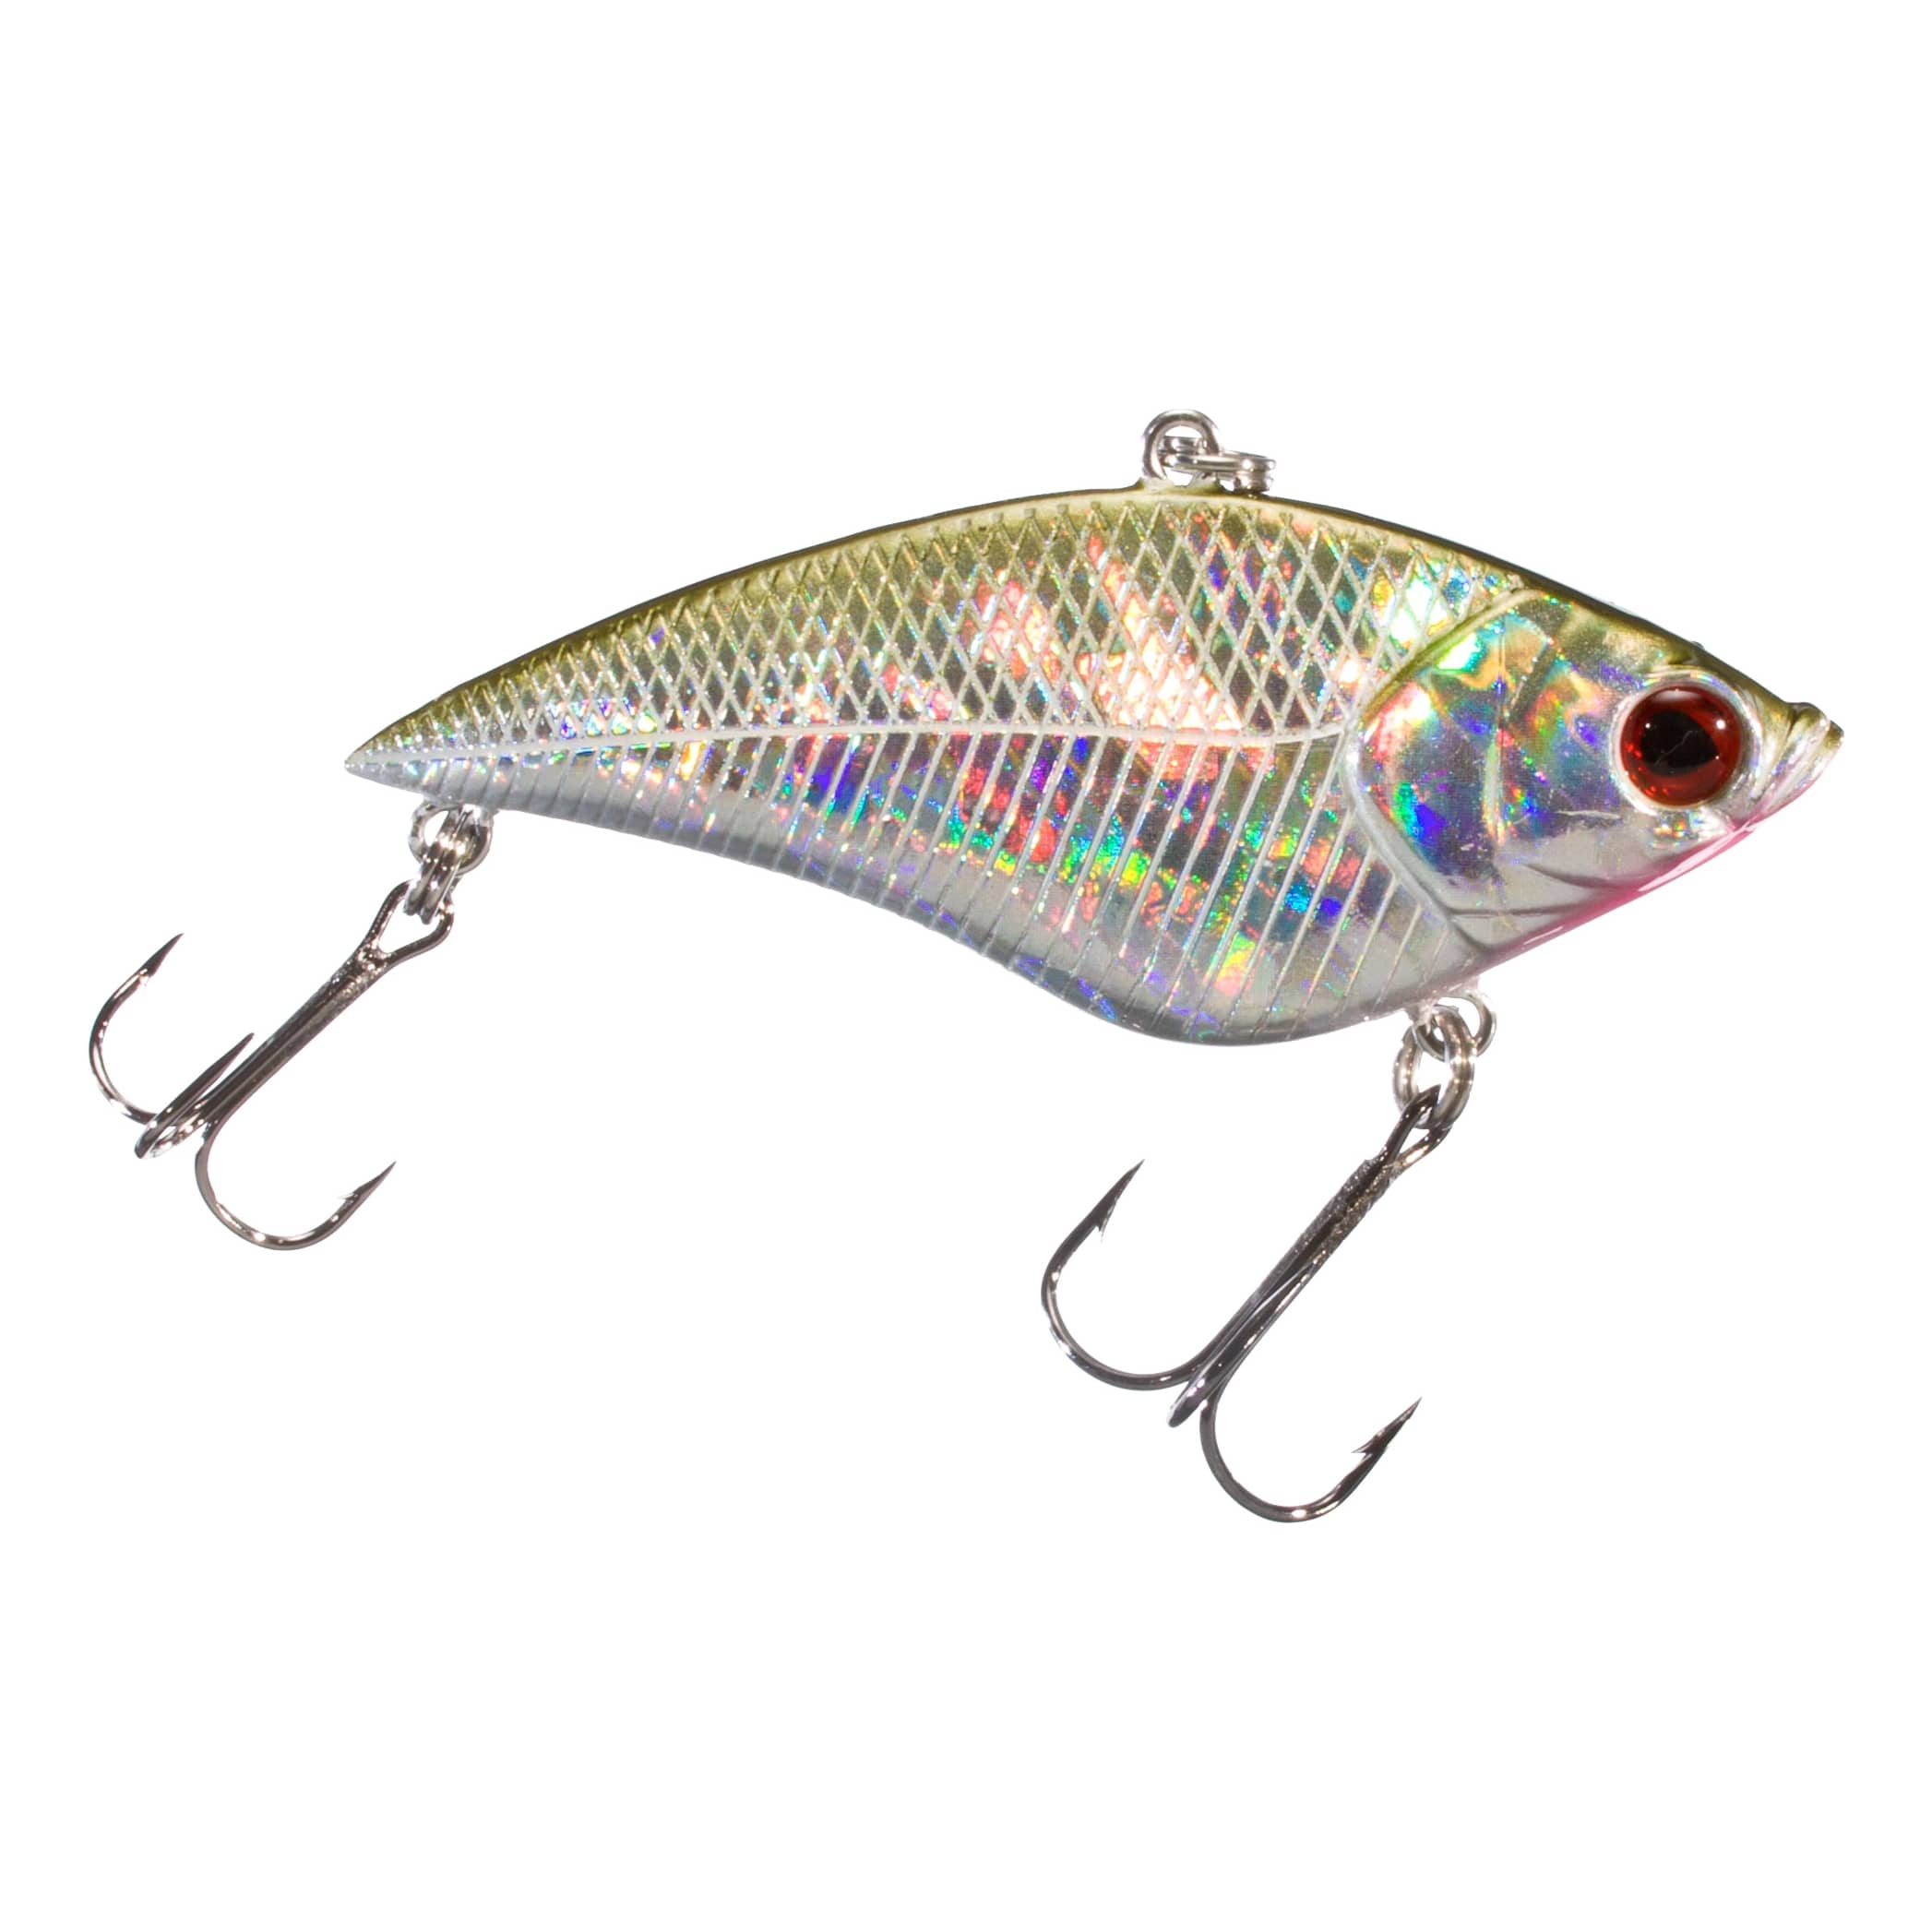 Bass Pro Shops® XPS® Rattle Shad® - Olive Shad